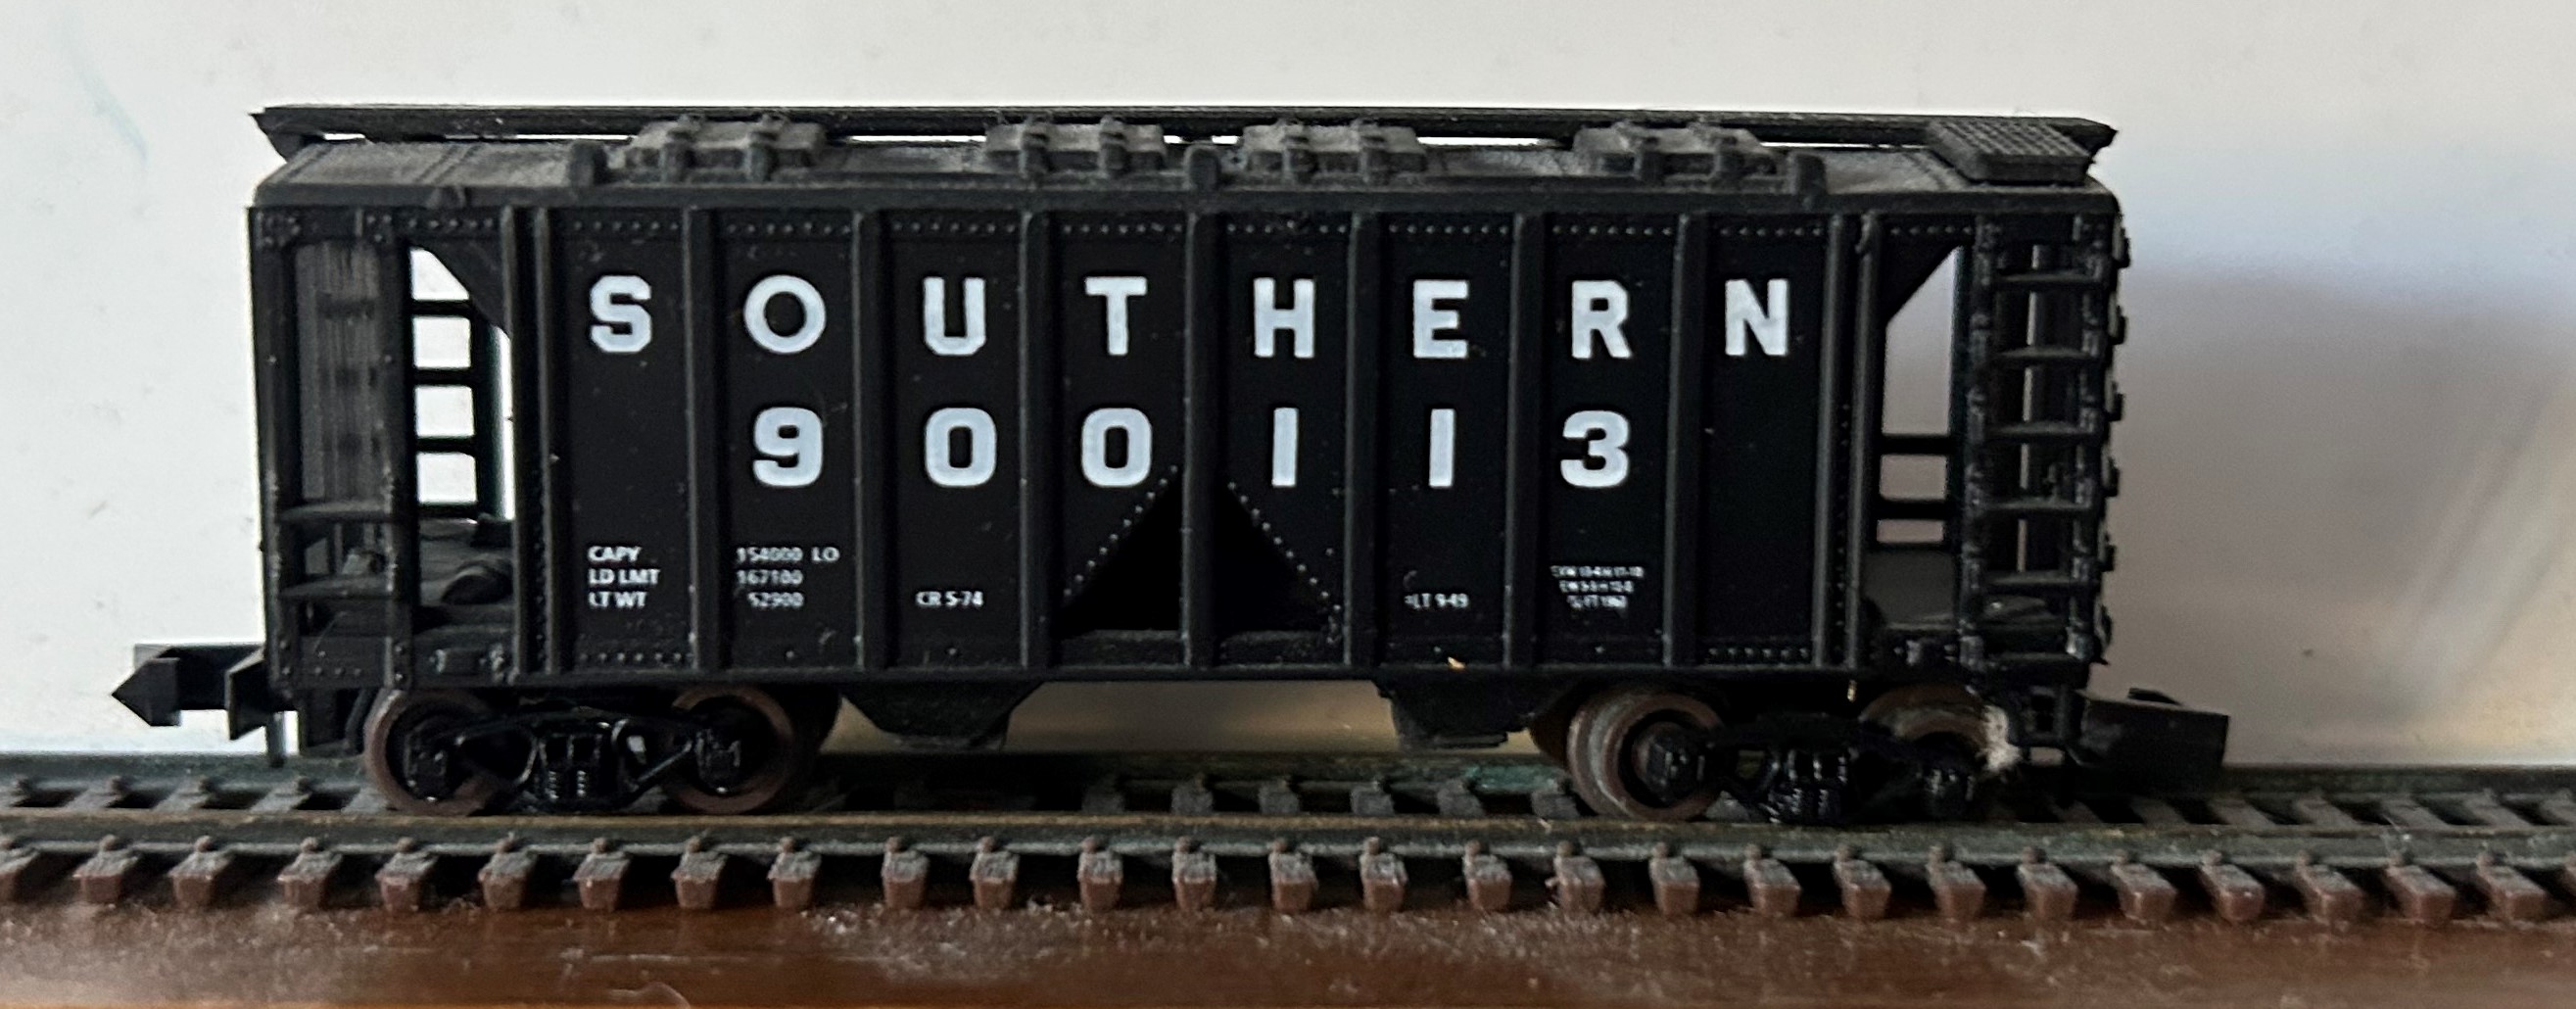 N Scale - Loco-Motives - 12090 - Covered Hopper, 2-Bay, ACF 36 Foot - Southern - 900113